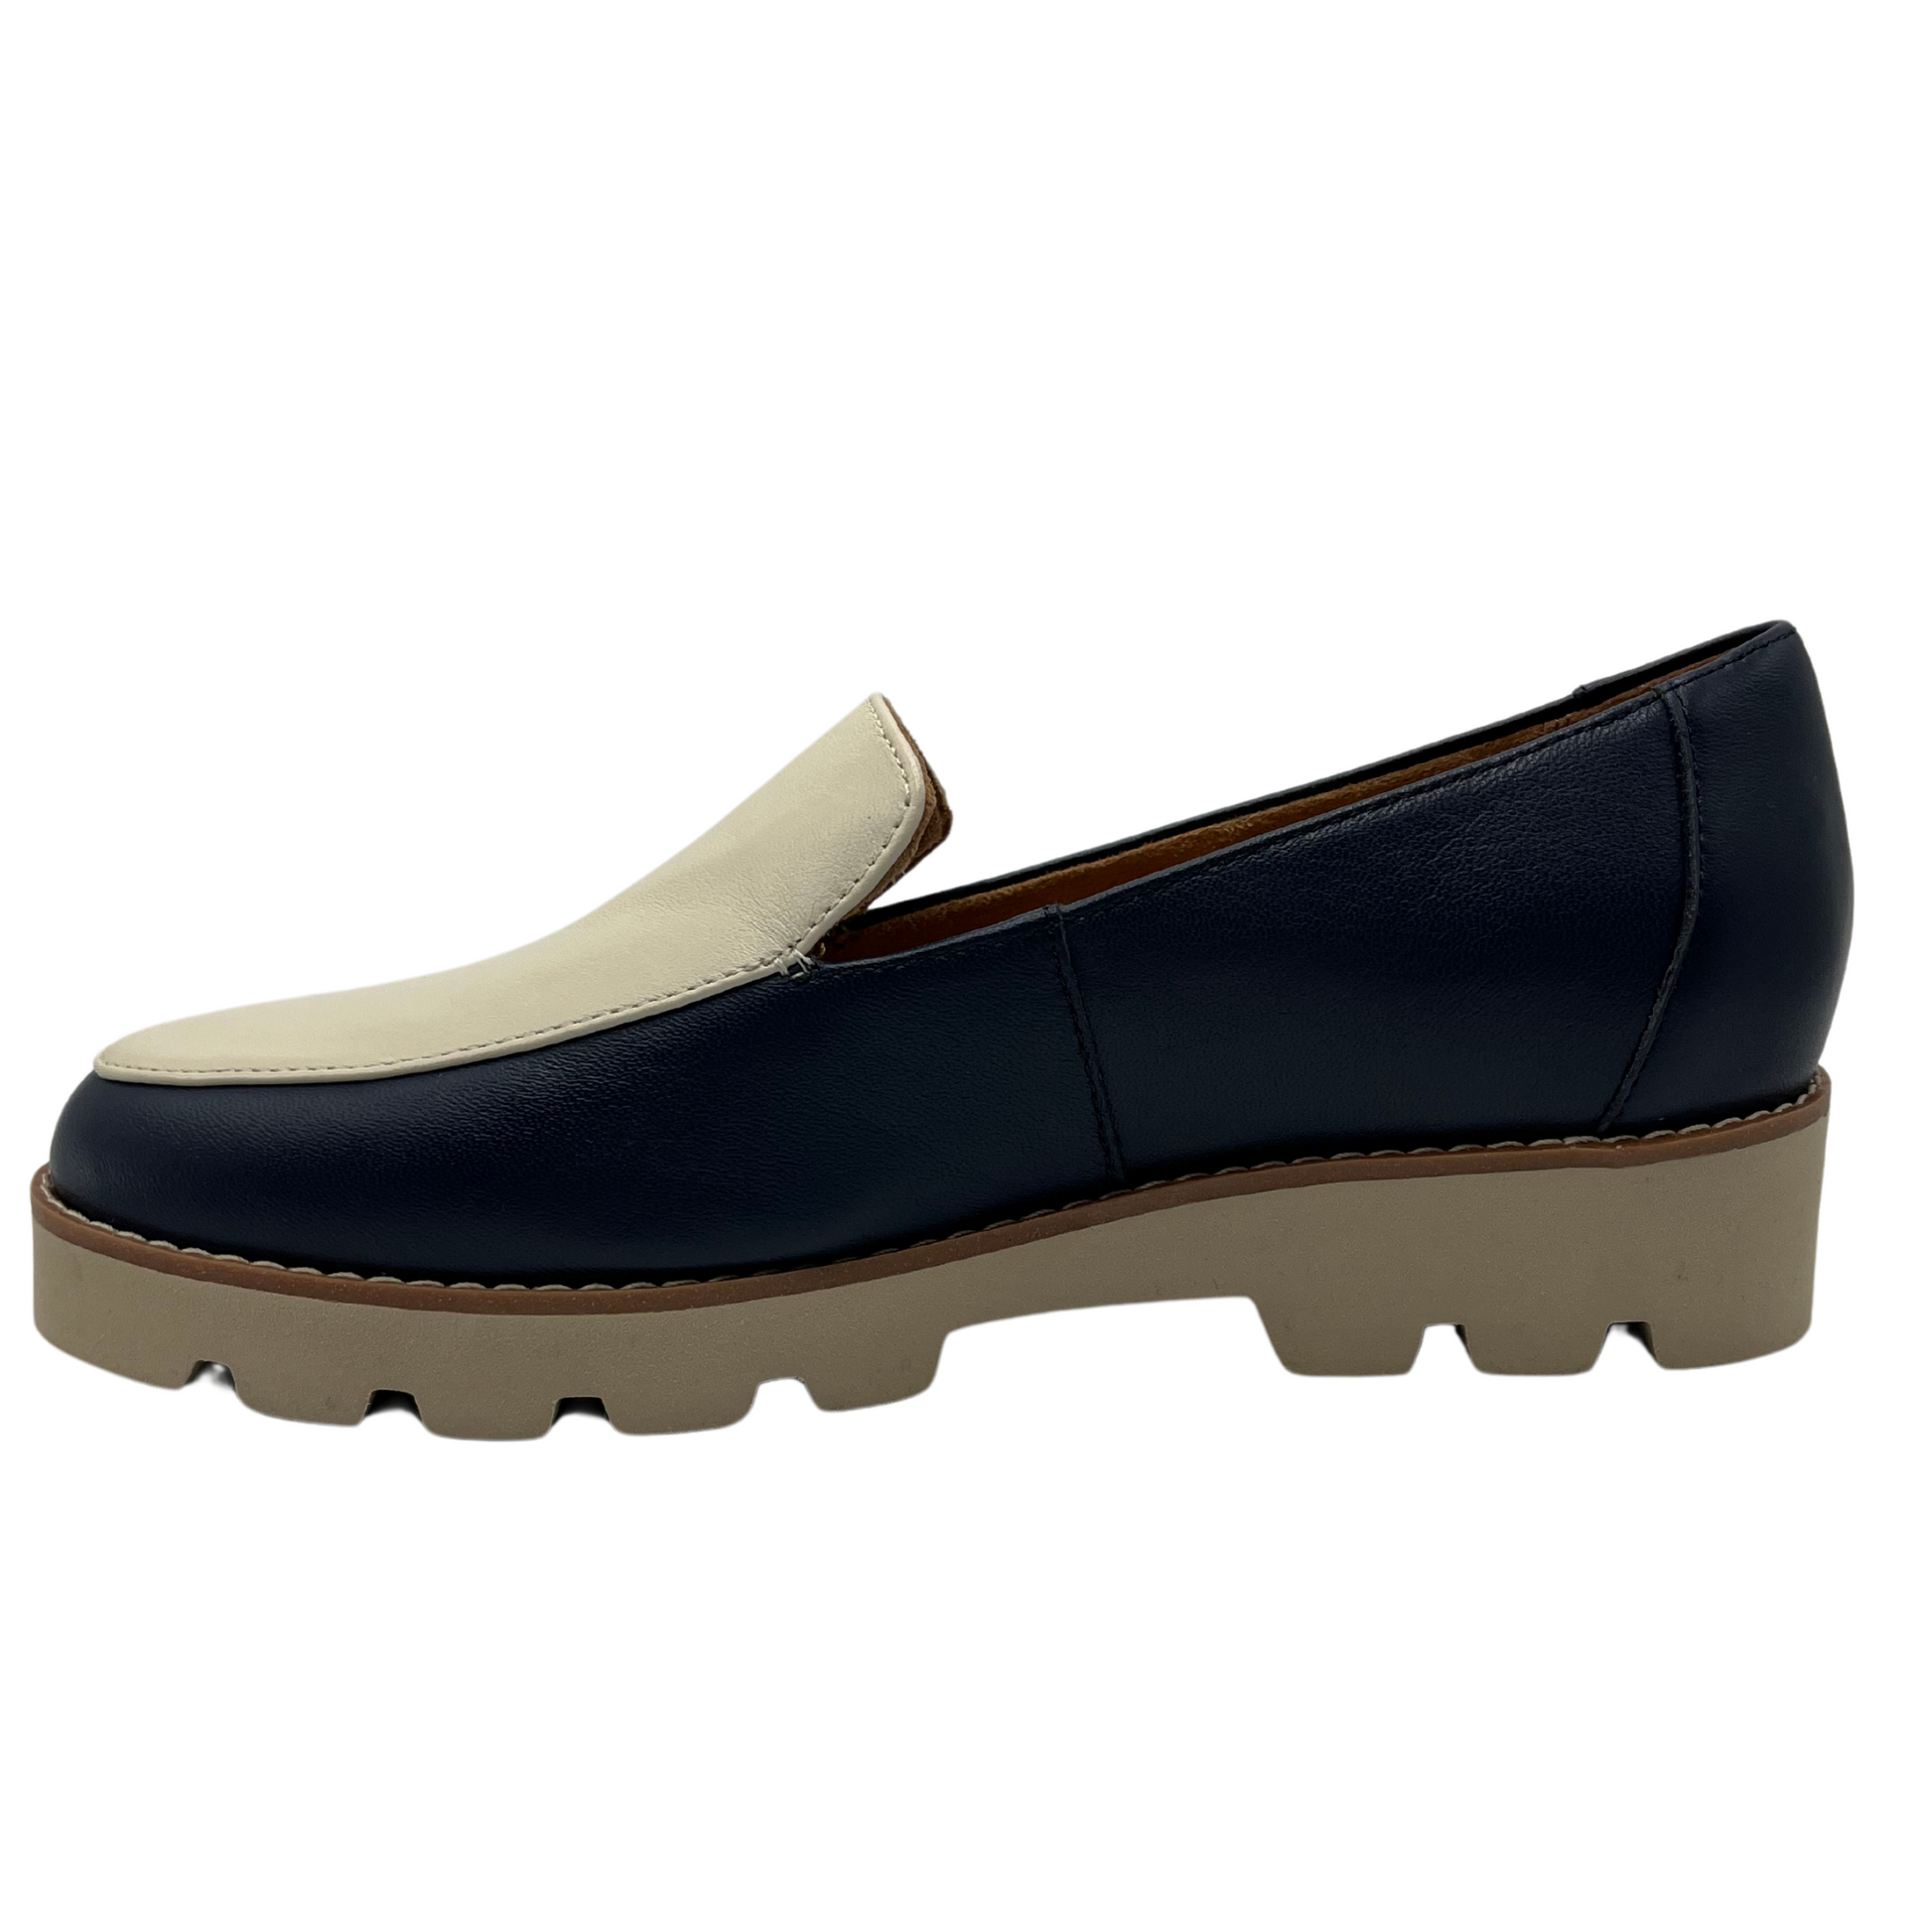 Left facing view of navy and cream leather loafer with chunky rubber outsole